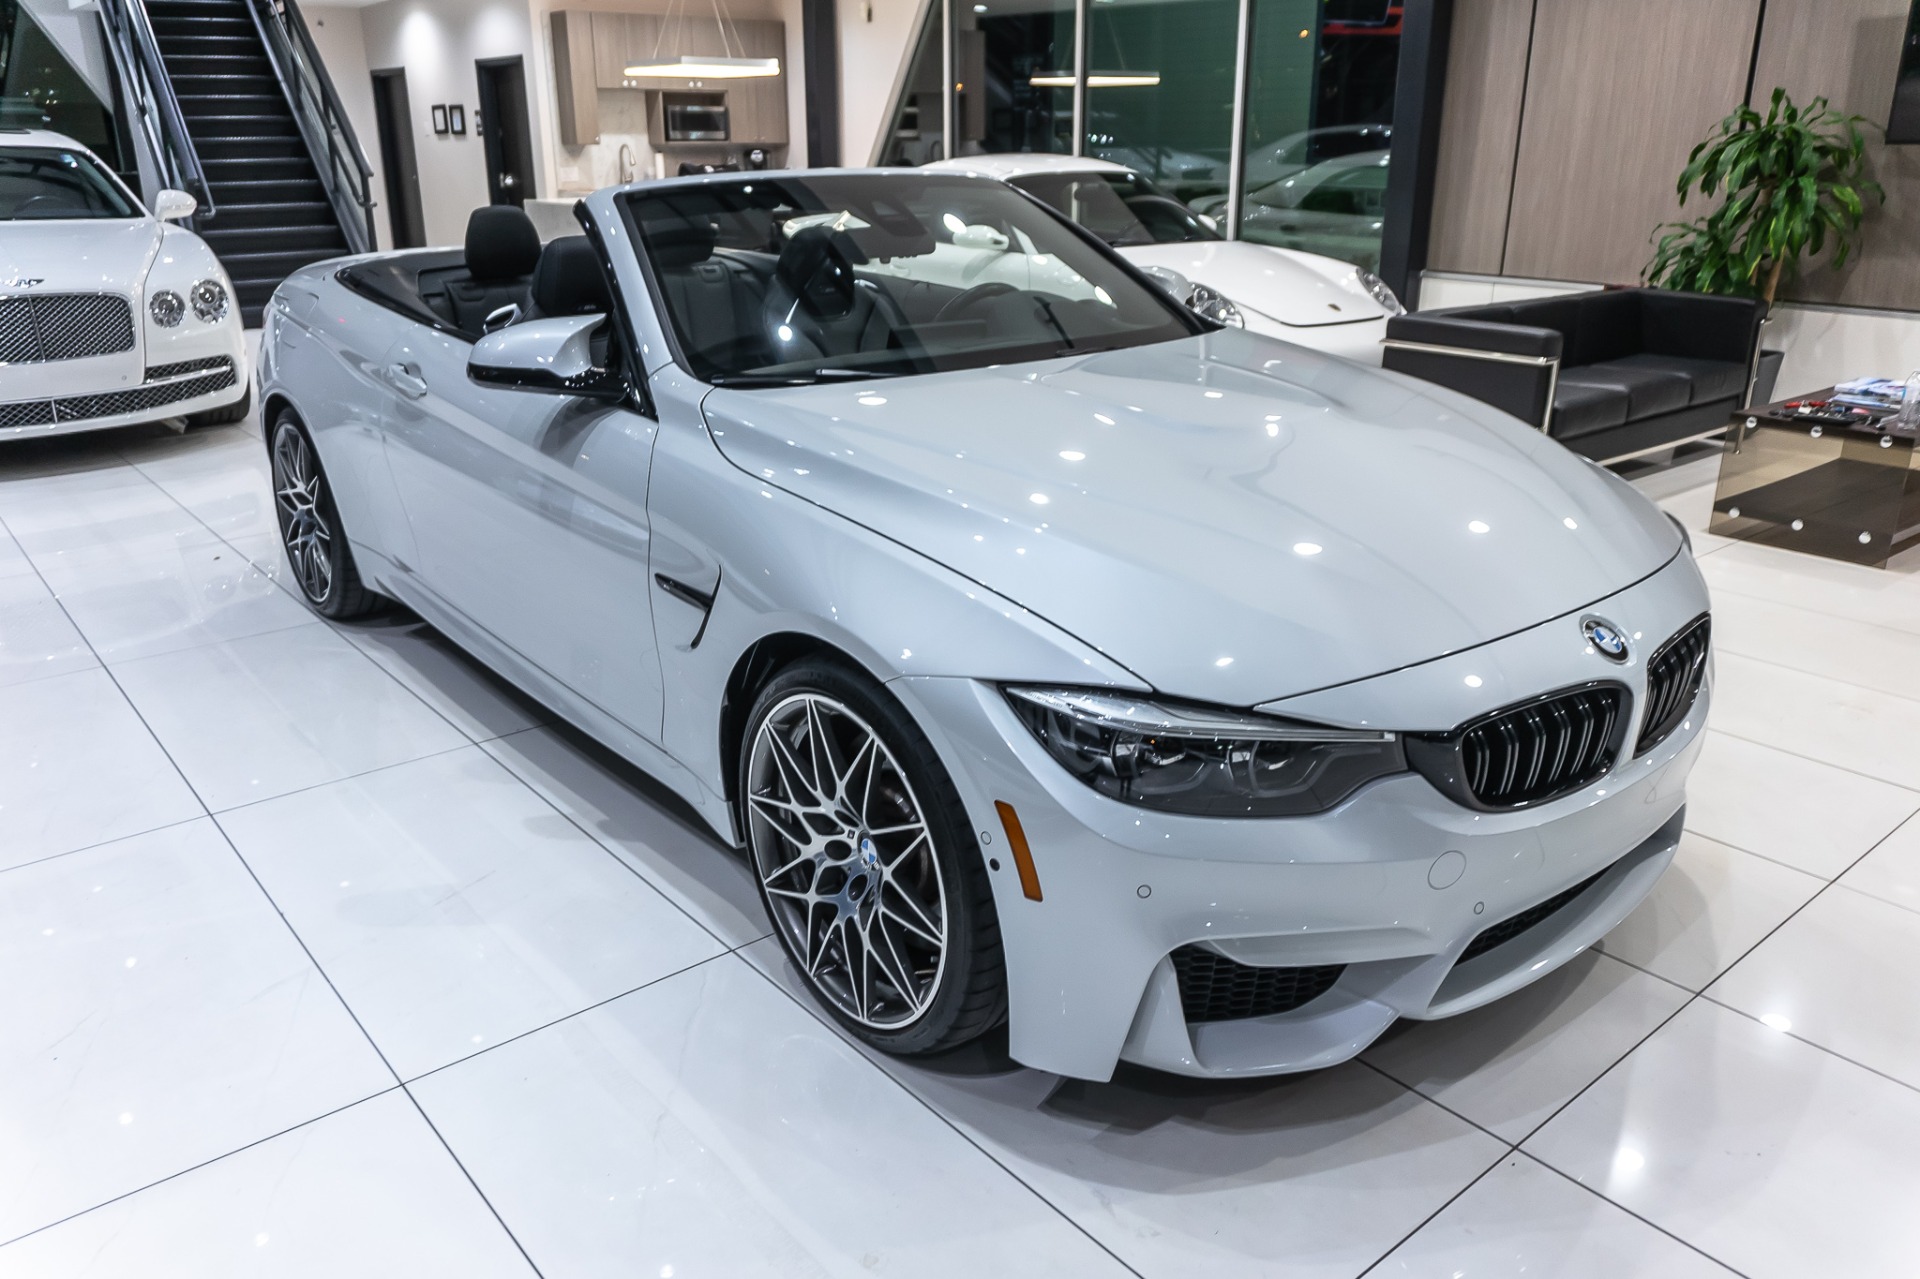 Used 2018 BMW M4 Convertible Competition Pkg + Executive Pkg $90k+ MSRP